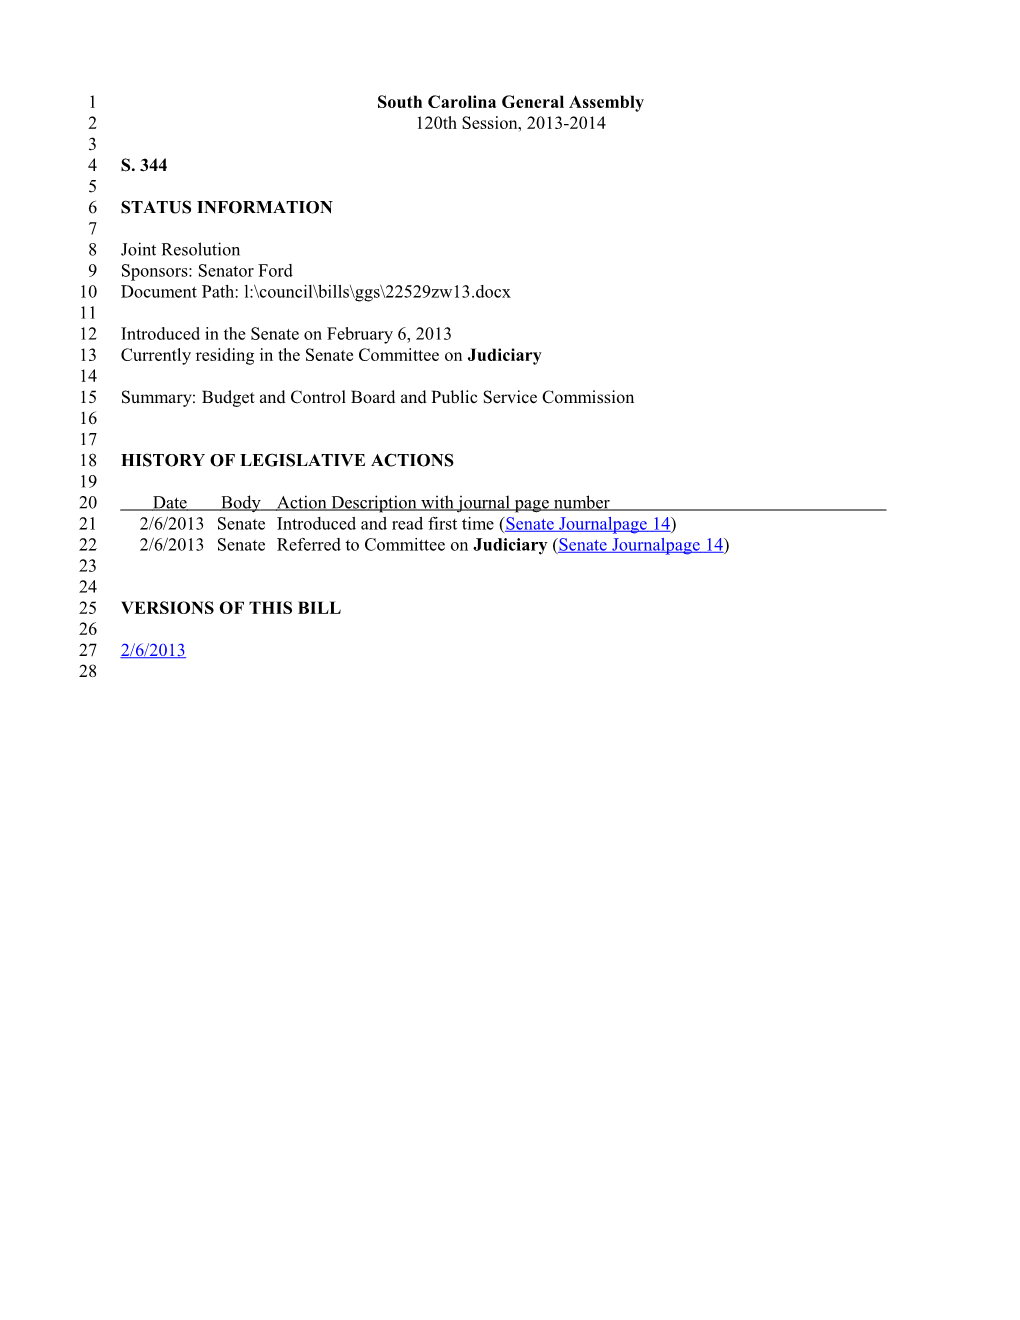 2013-2014 Bill 344: Budget and Control Board and Public Service Commission - South Carolina